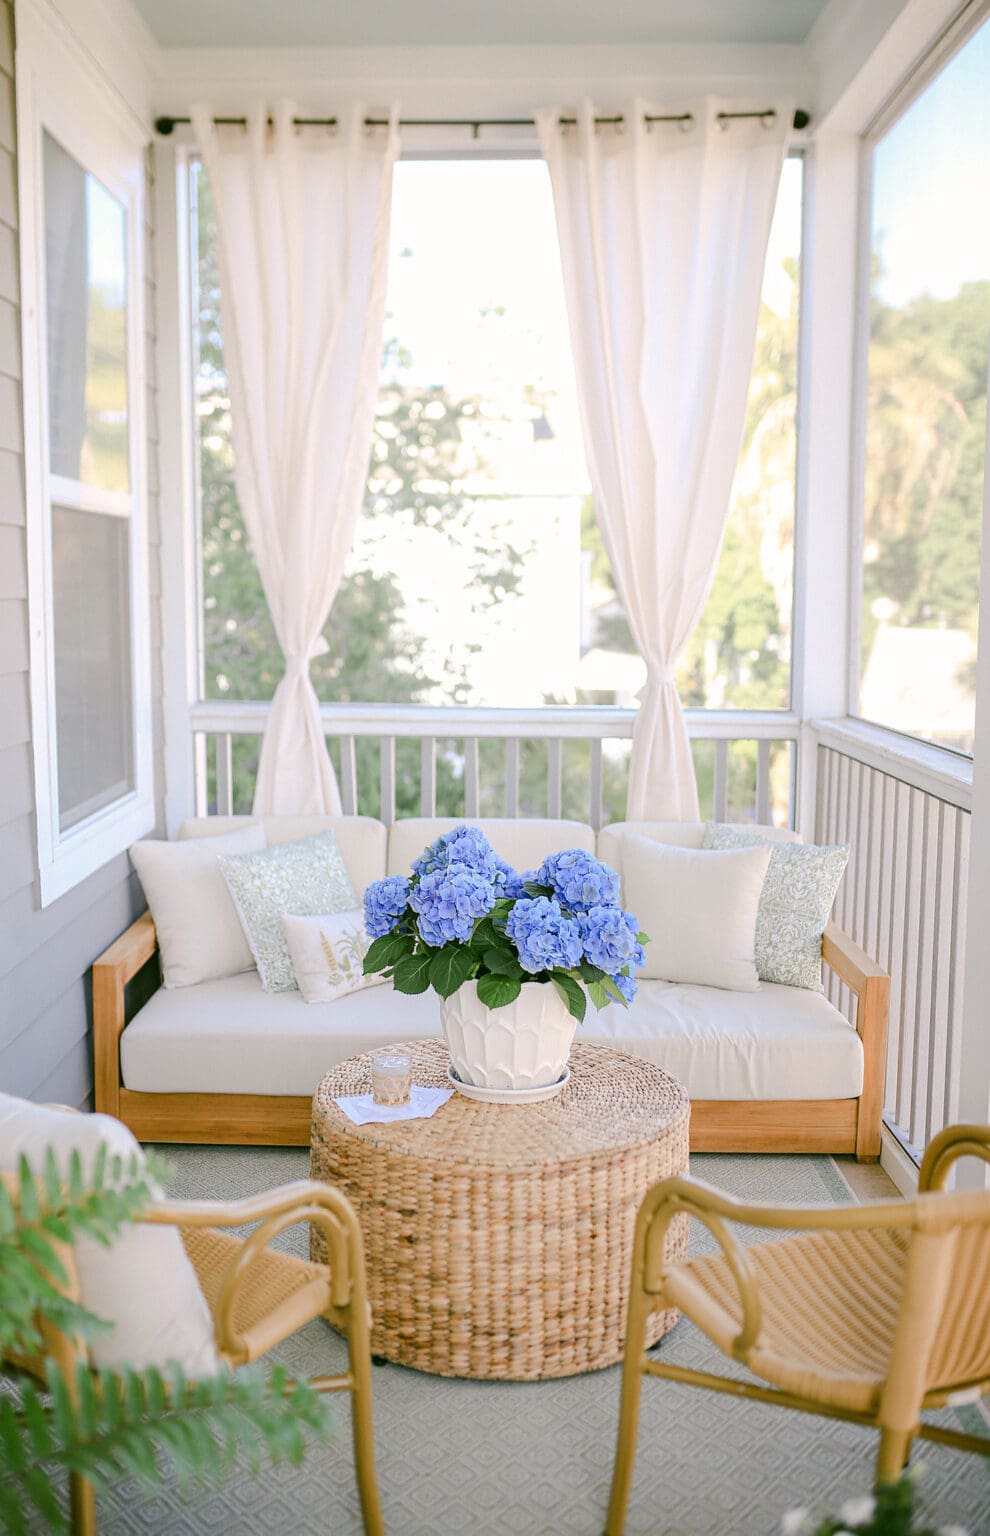 Front porch featuring sofa with curtains featured in outdoor decorating ideas